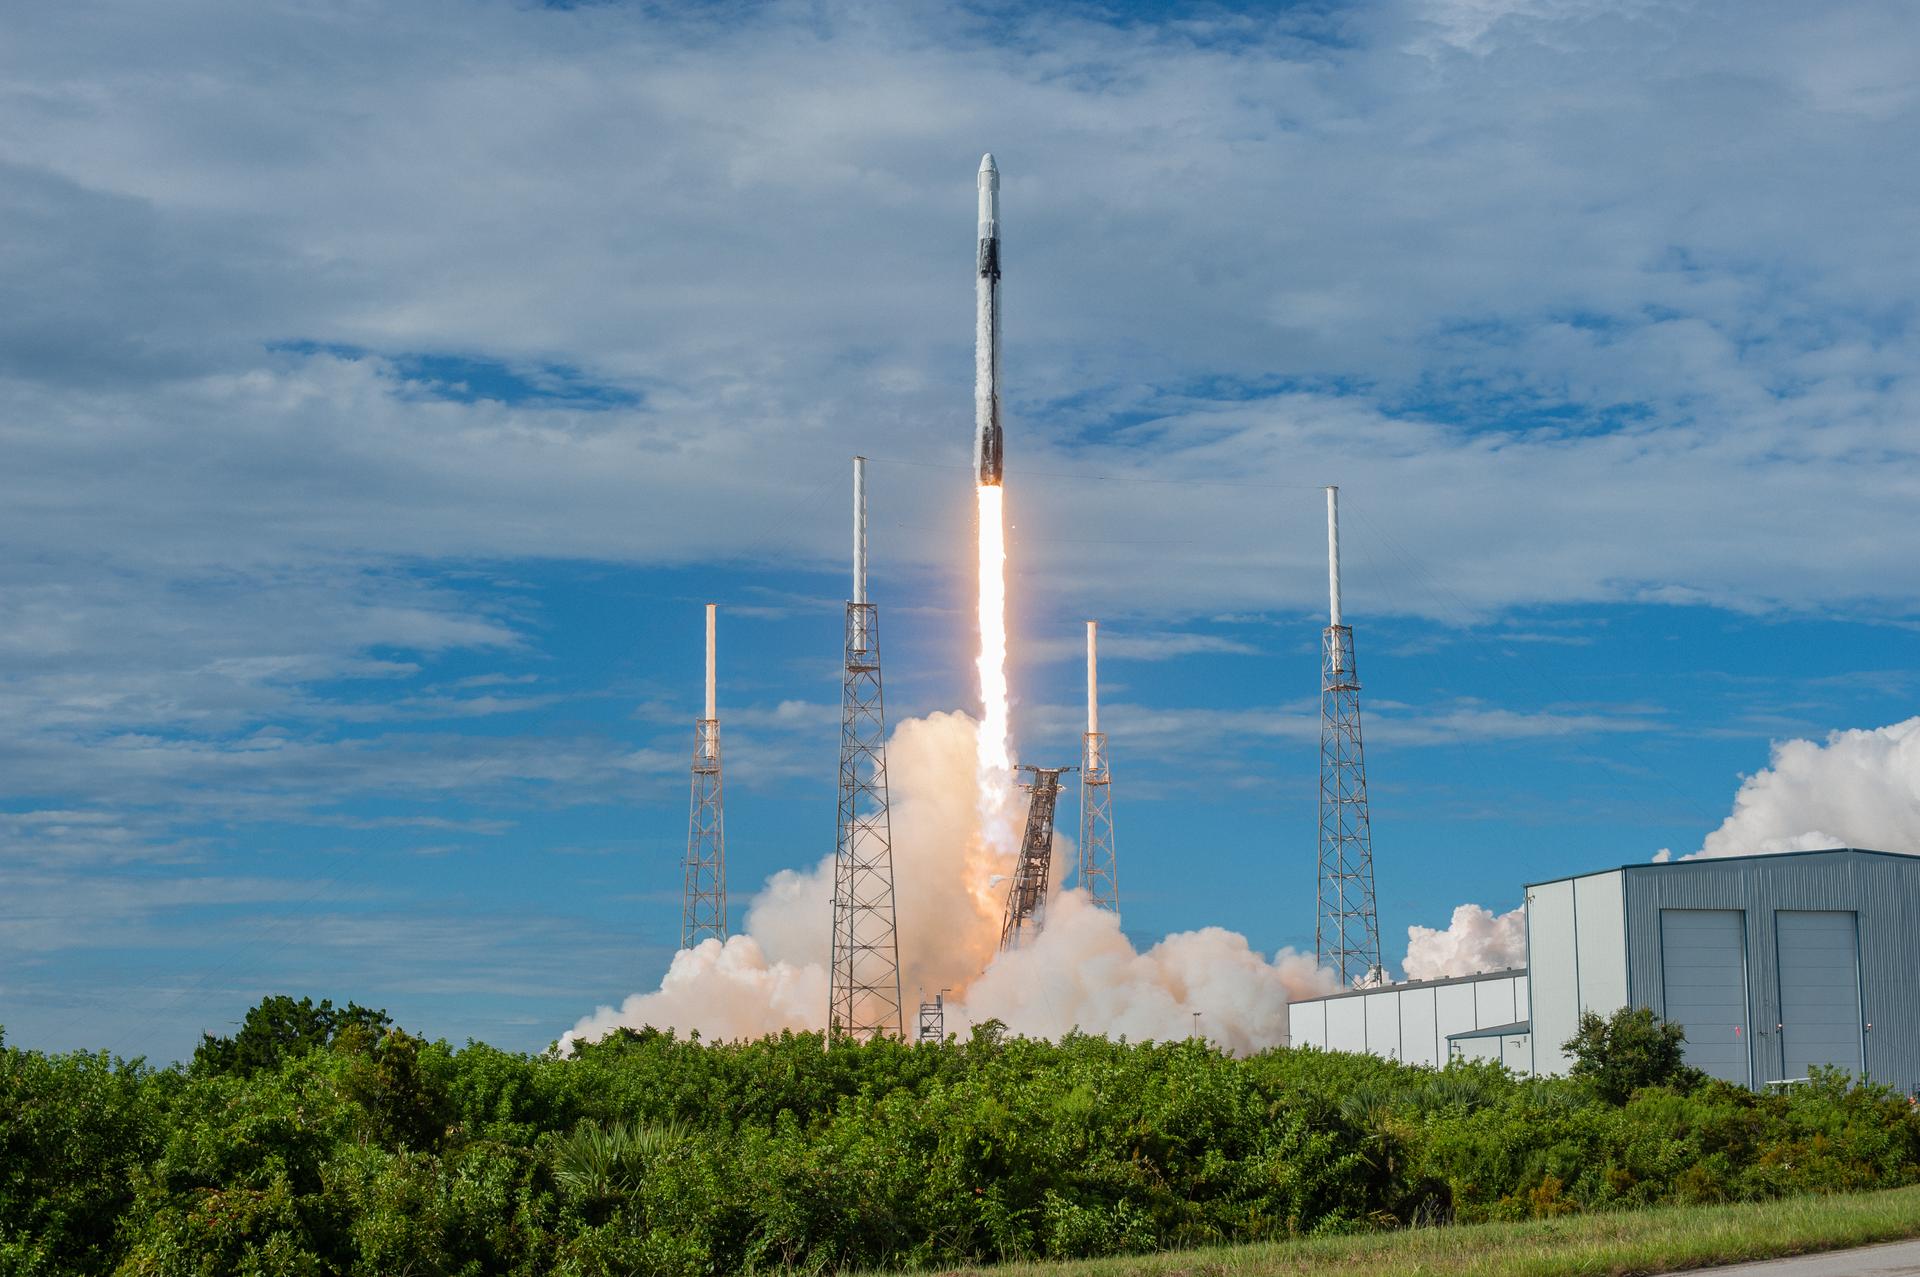 SpaceX Falcon 9 rocket lifts off from Space Launch Complex 40 at Cape Canaveral Air Force Station in Florida July 25, 2019